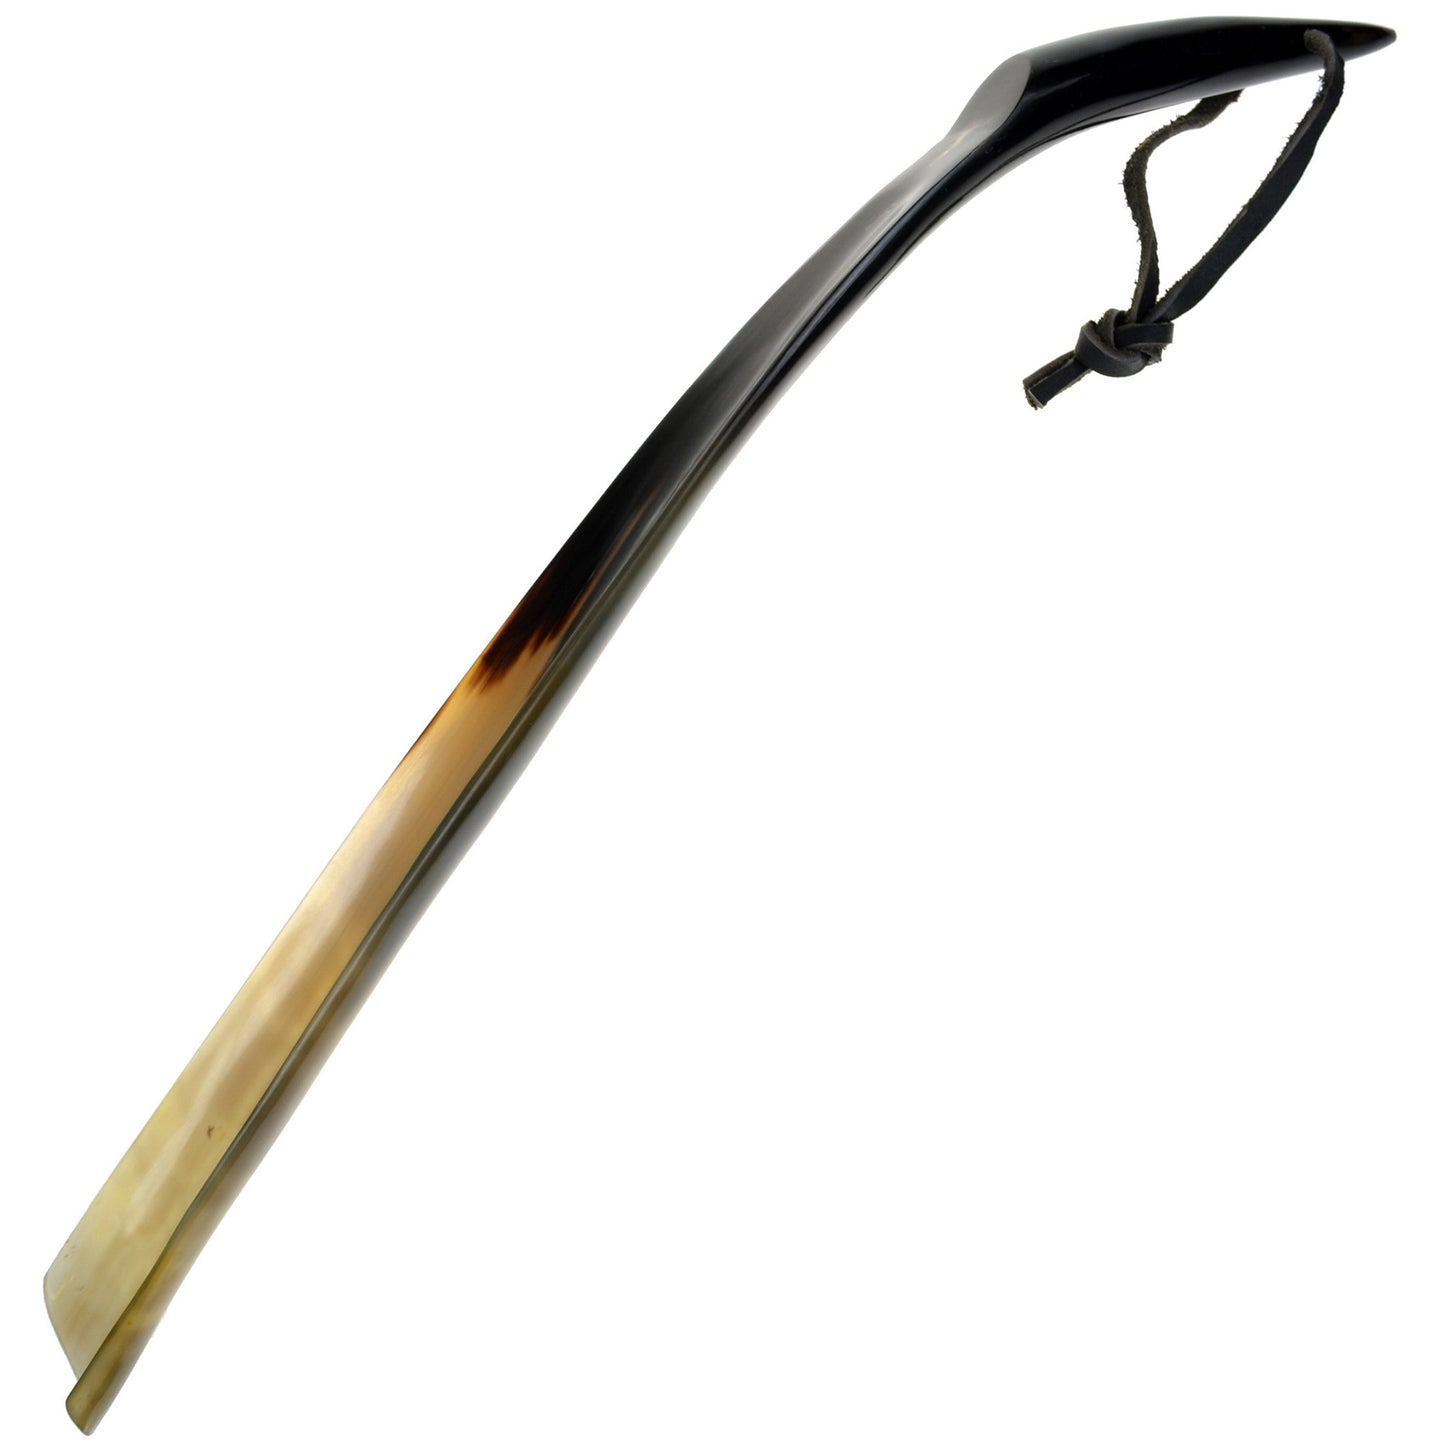 z - 21-22", 53-56cm - Handcrafted Real Horn Shoe Horn